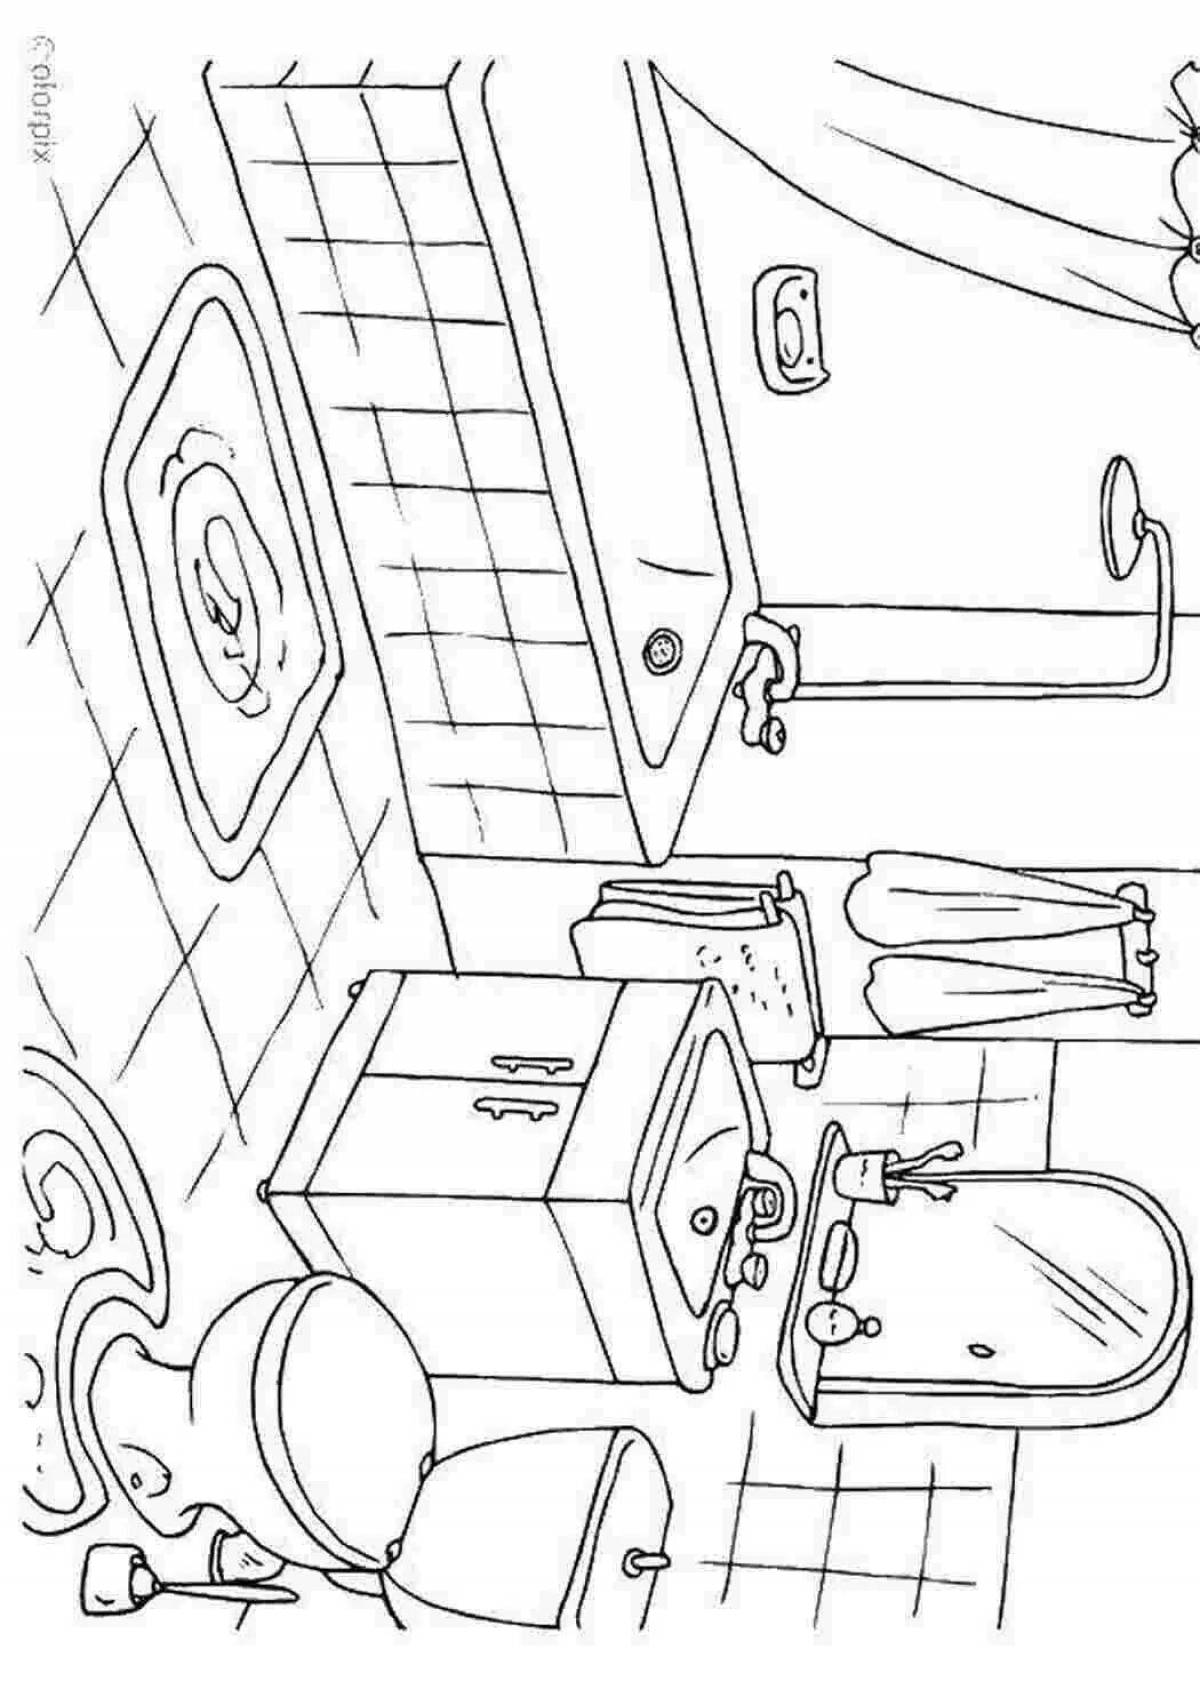 Living toilet coloring page for kids